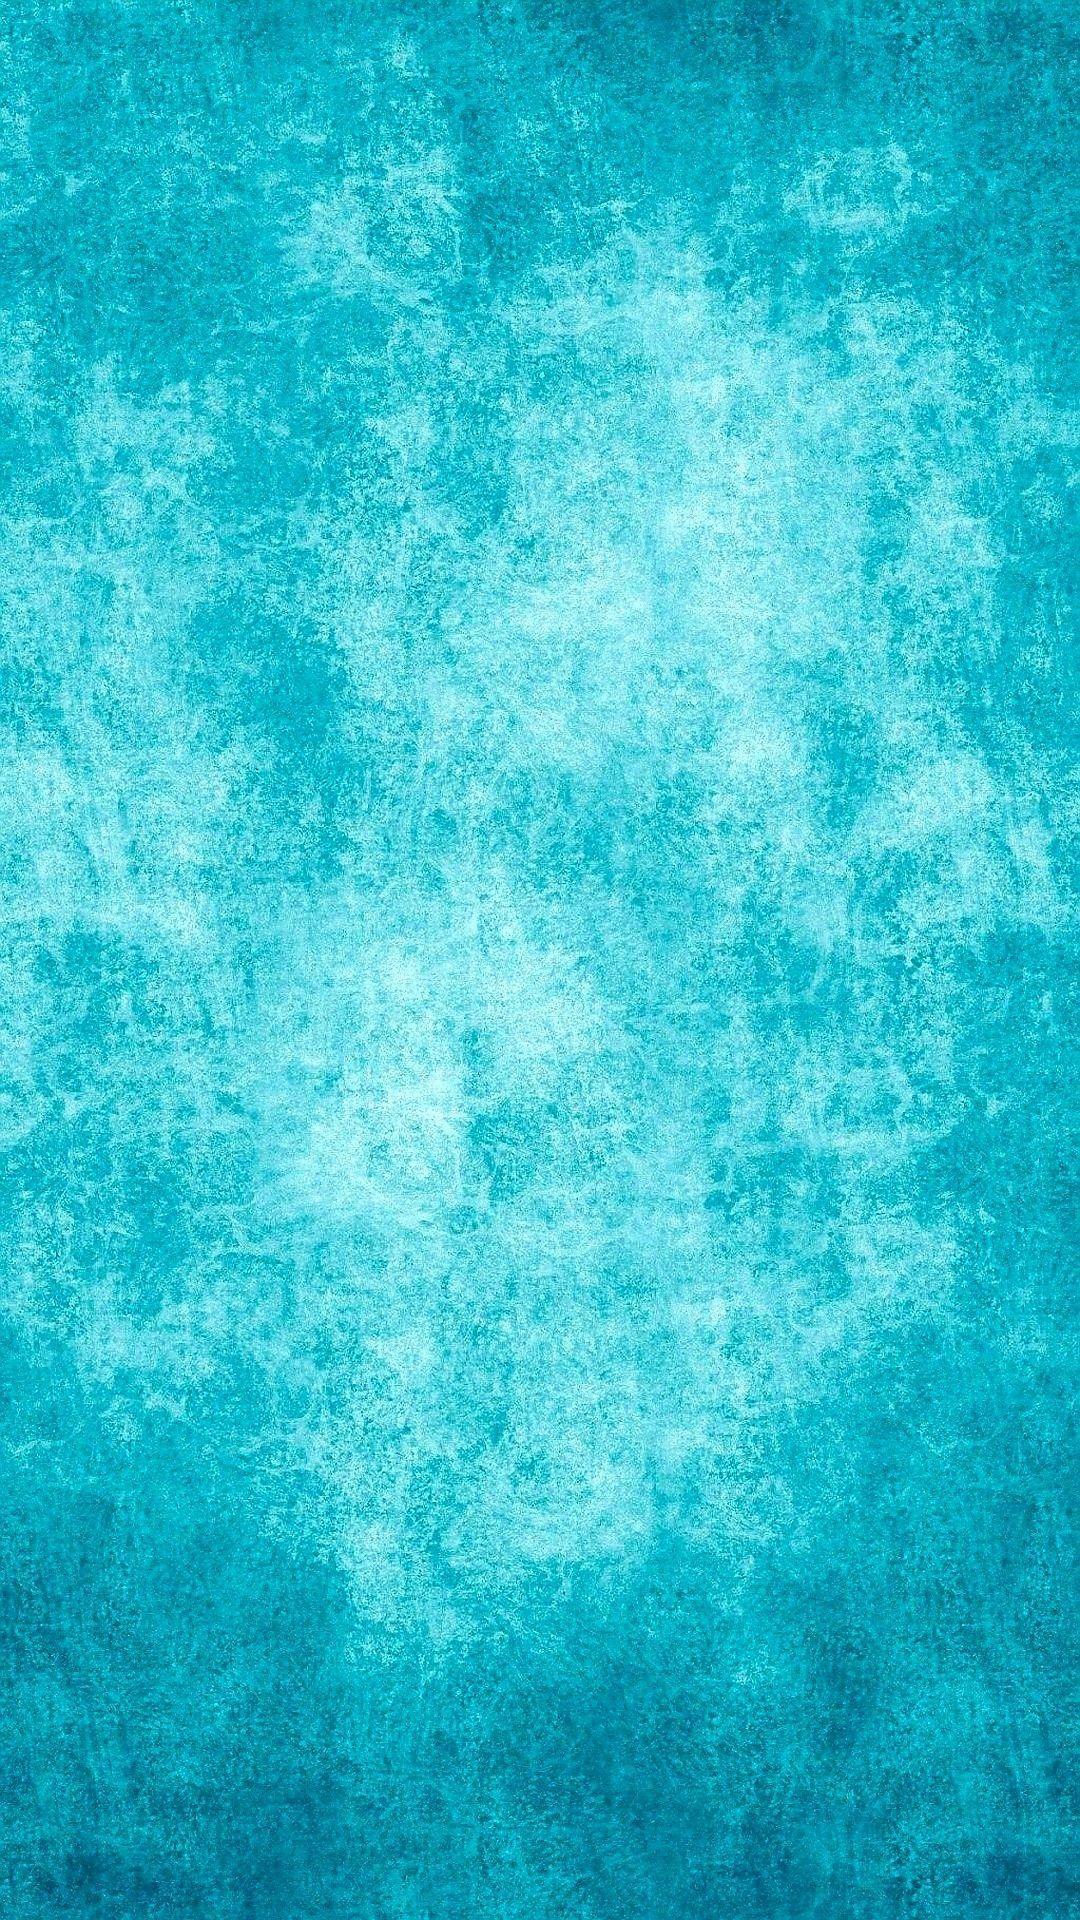 294530 Blue, Aqua, Water, Turquoise, Teal, Apple iPhone XR wallpaper free  download, 828x1792 - Rare Gallery HD Wallpapers